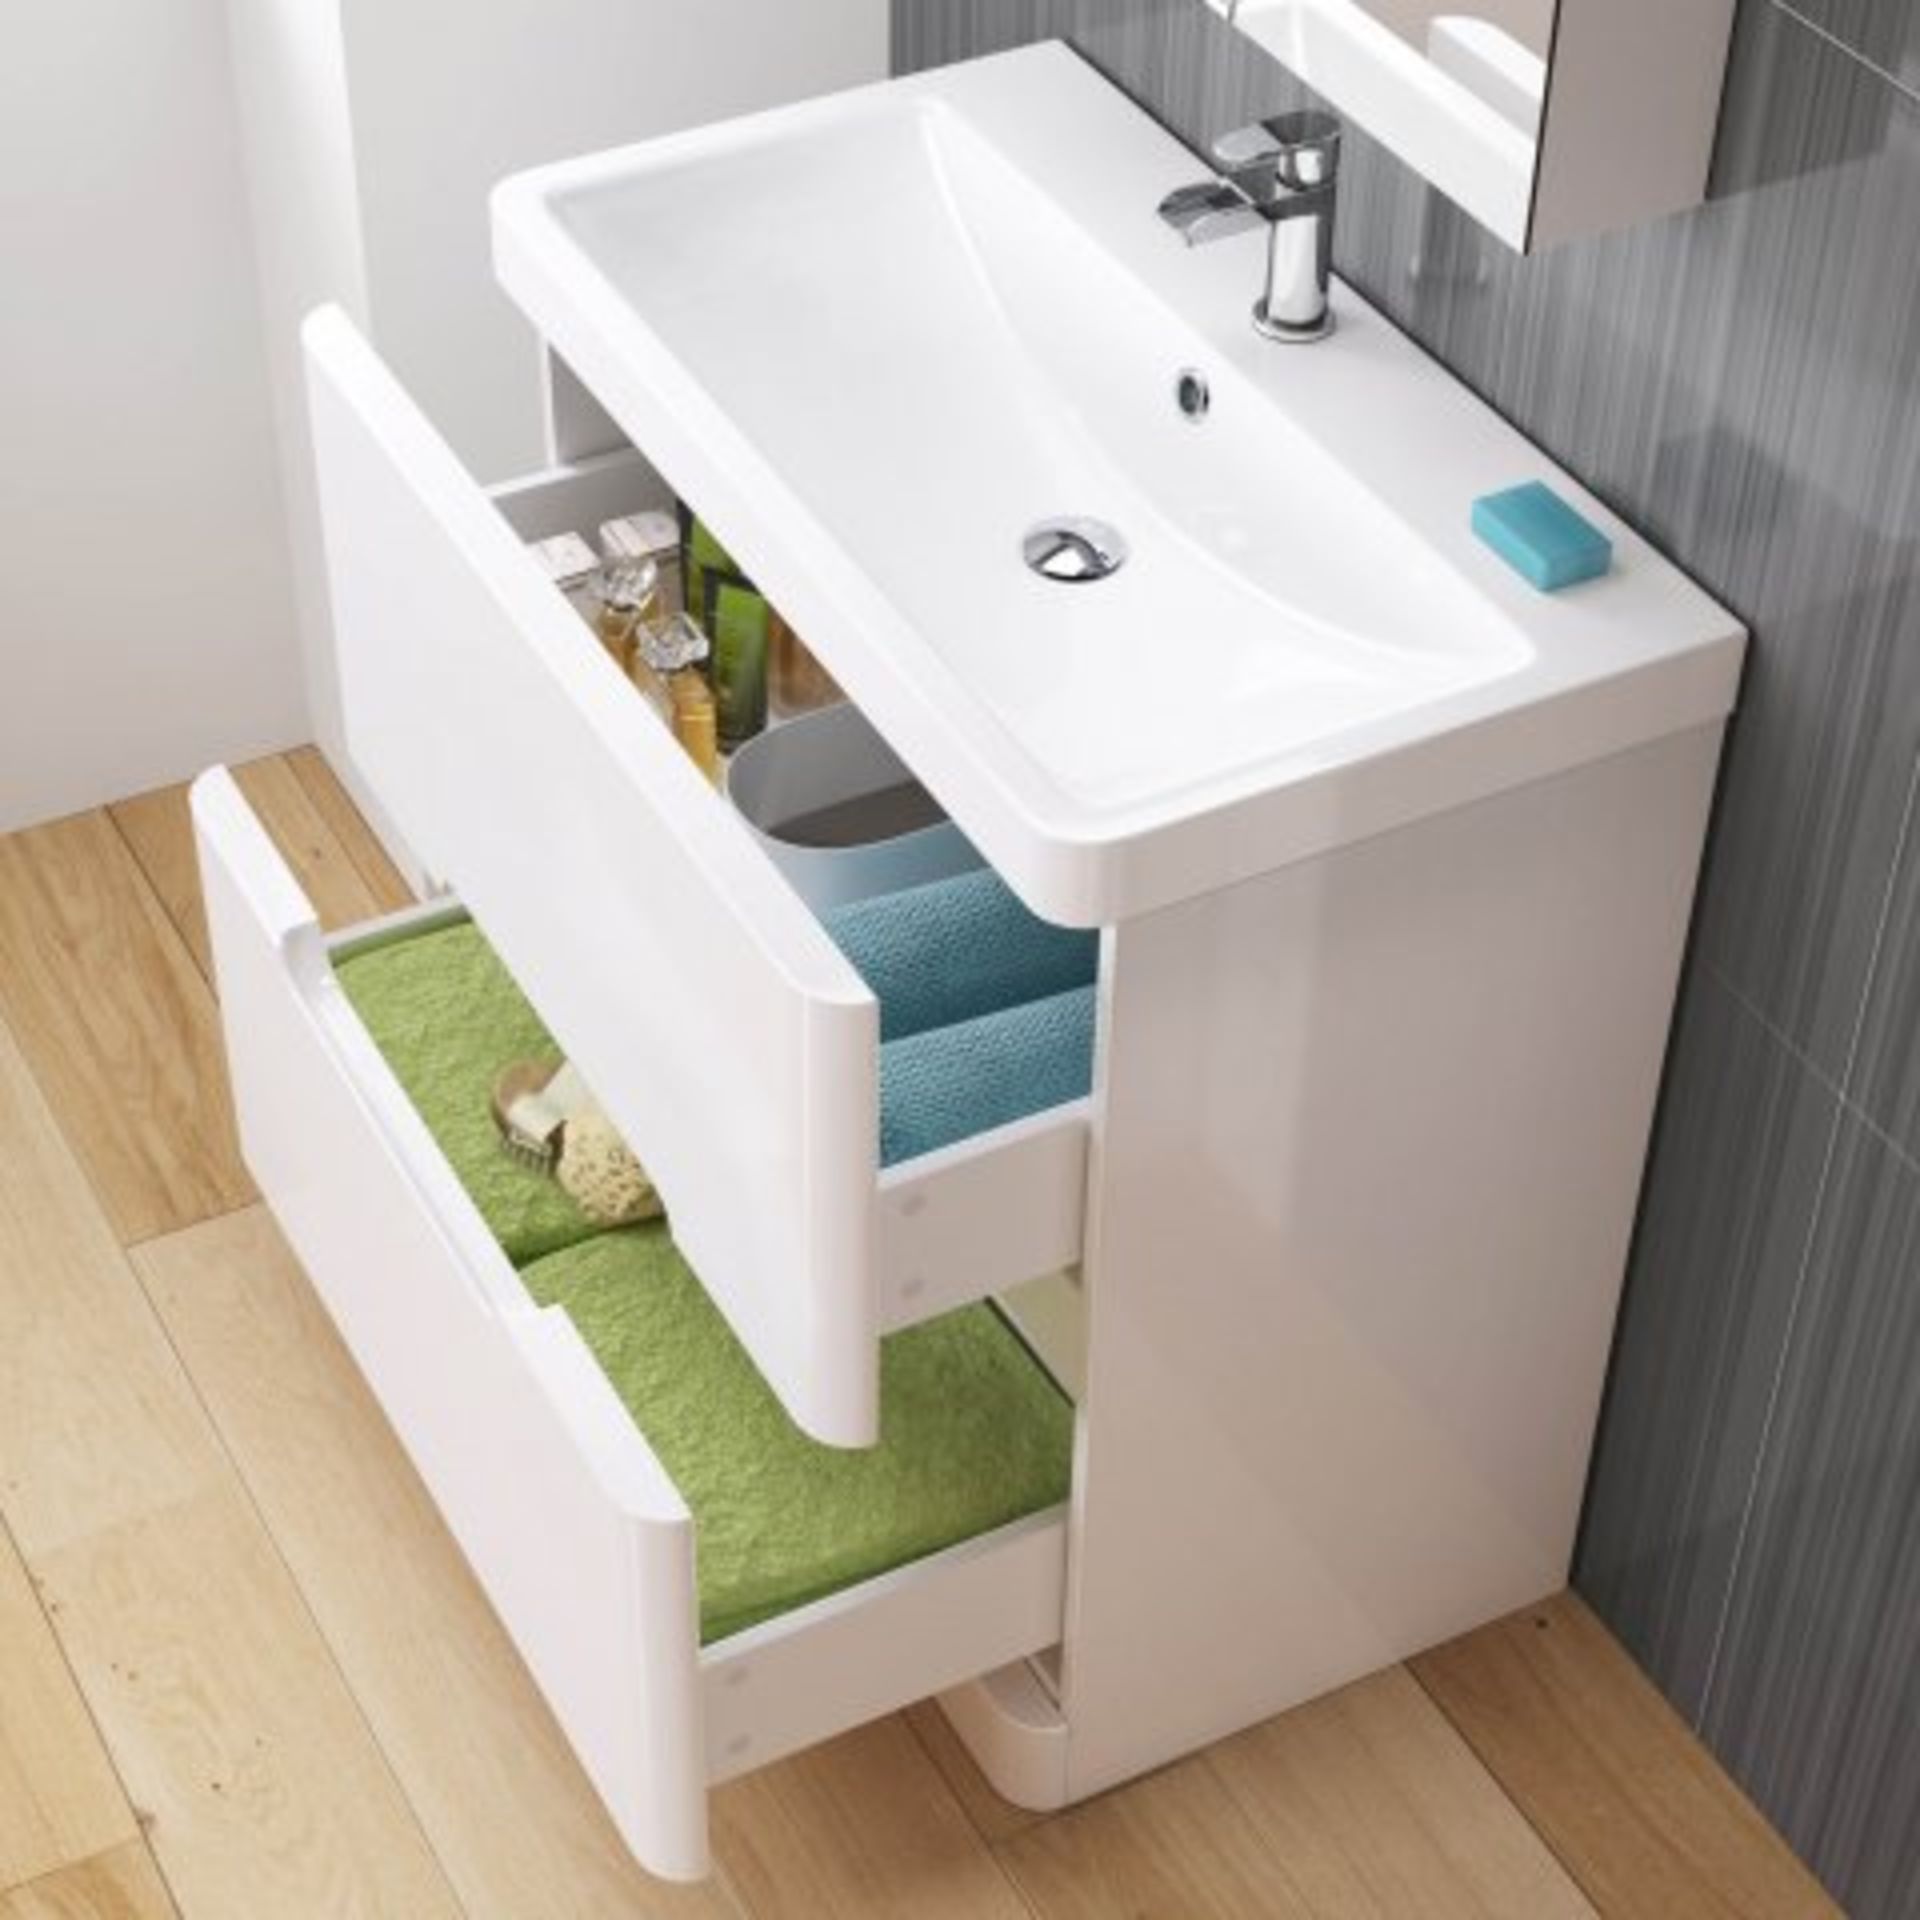 (J40) 800mm Tuscany Gloss White Built In Basin Double Drawer Unit - Floor Standing. RRP £724.99 - Image 3 of 5